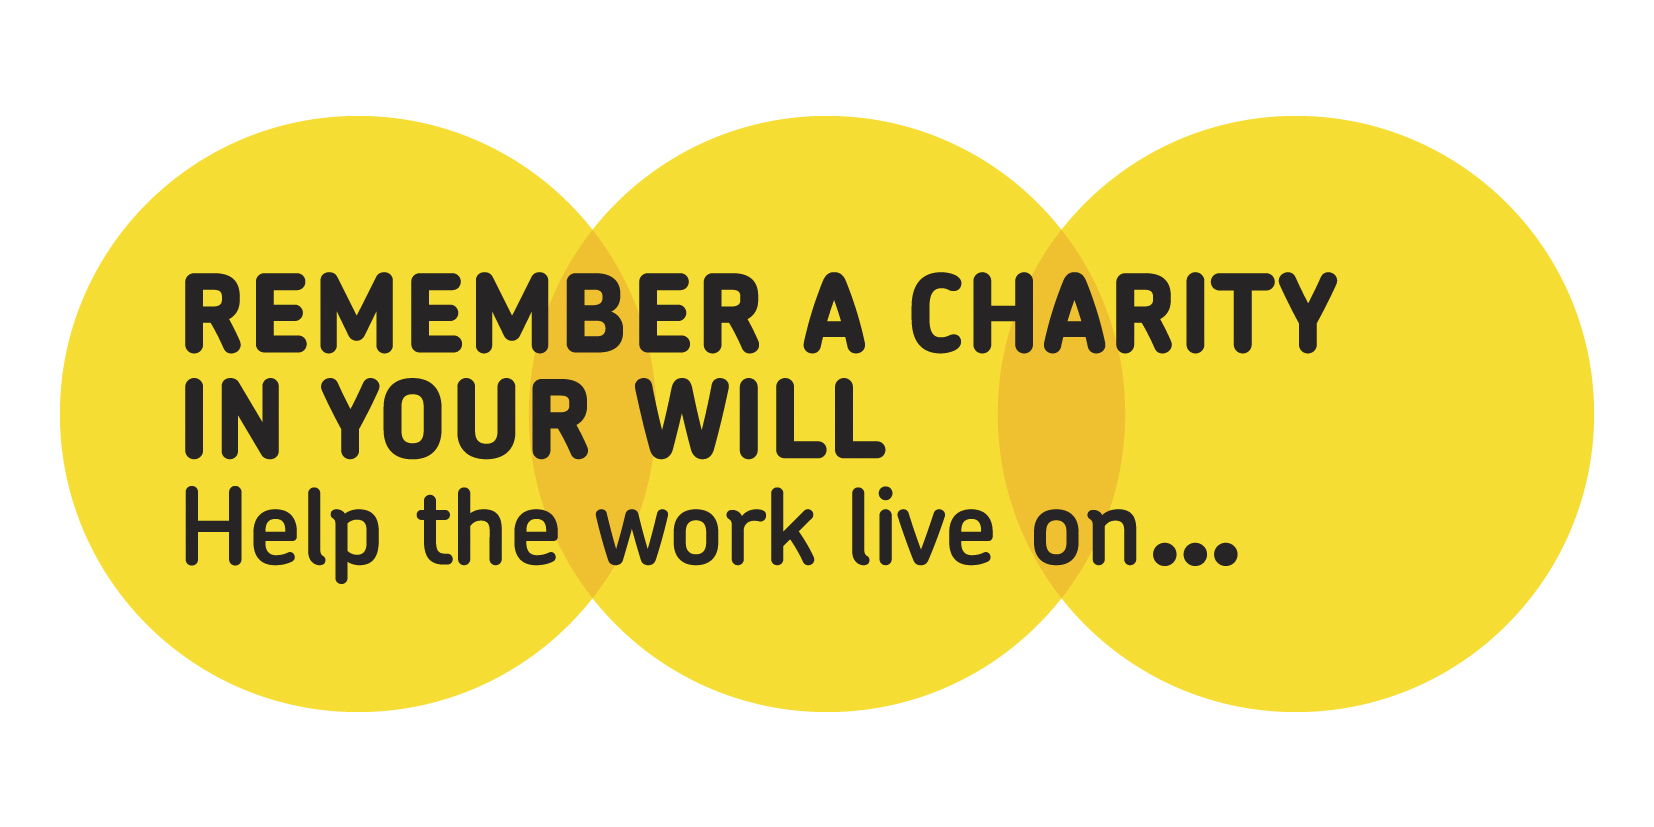 Remember A Charity in your will. Help the work live on...